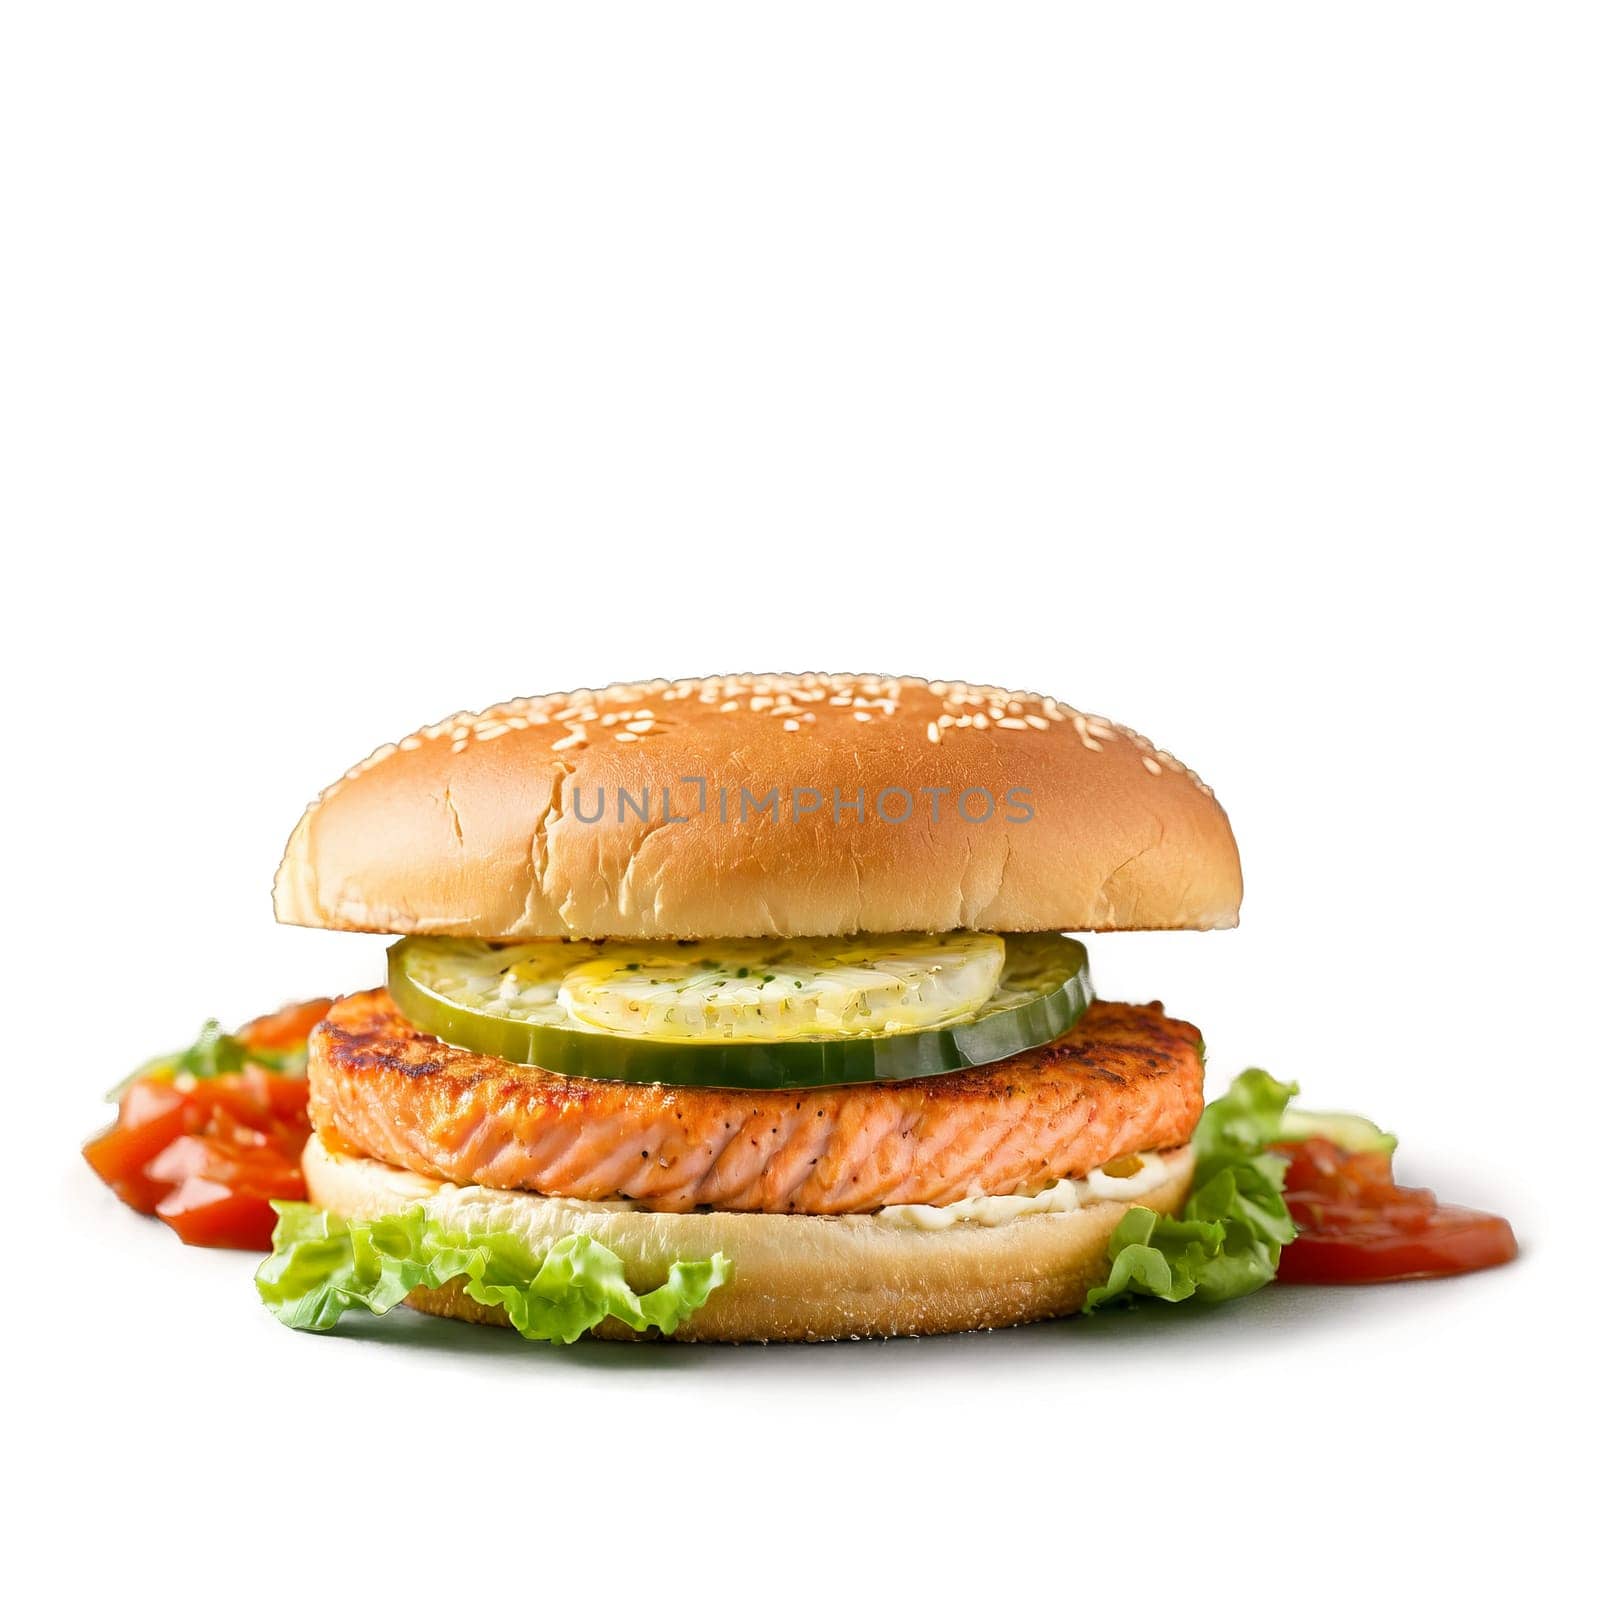 Salmon burger a golden brown and crispy served with a side of marinara sauce for. Food isolated on transparent background